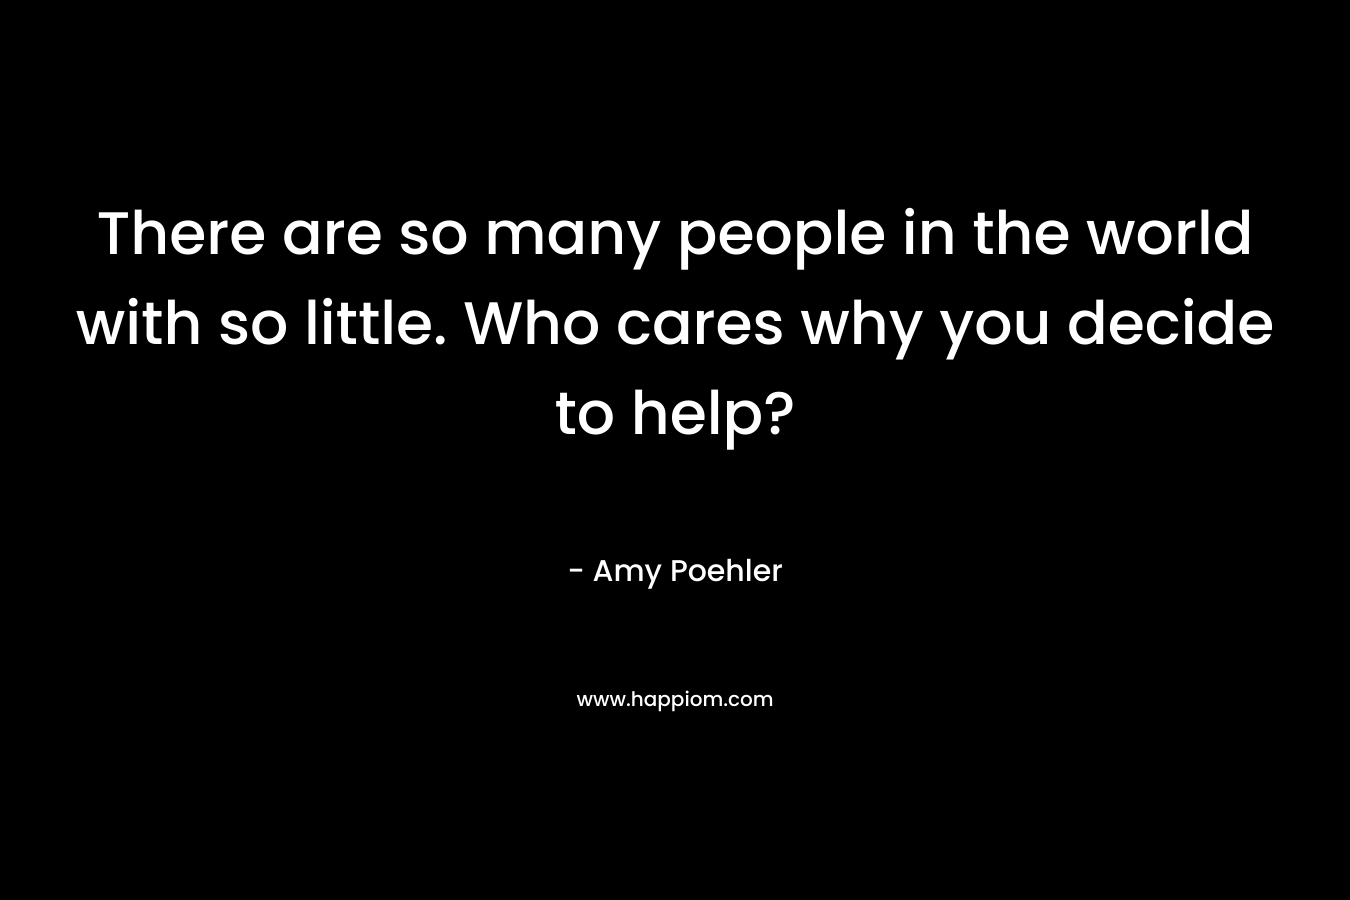 There are so many people in the world with so little. Who cares why you decide to help? – Amy Poehler